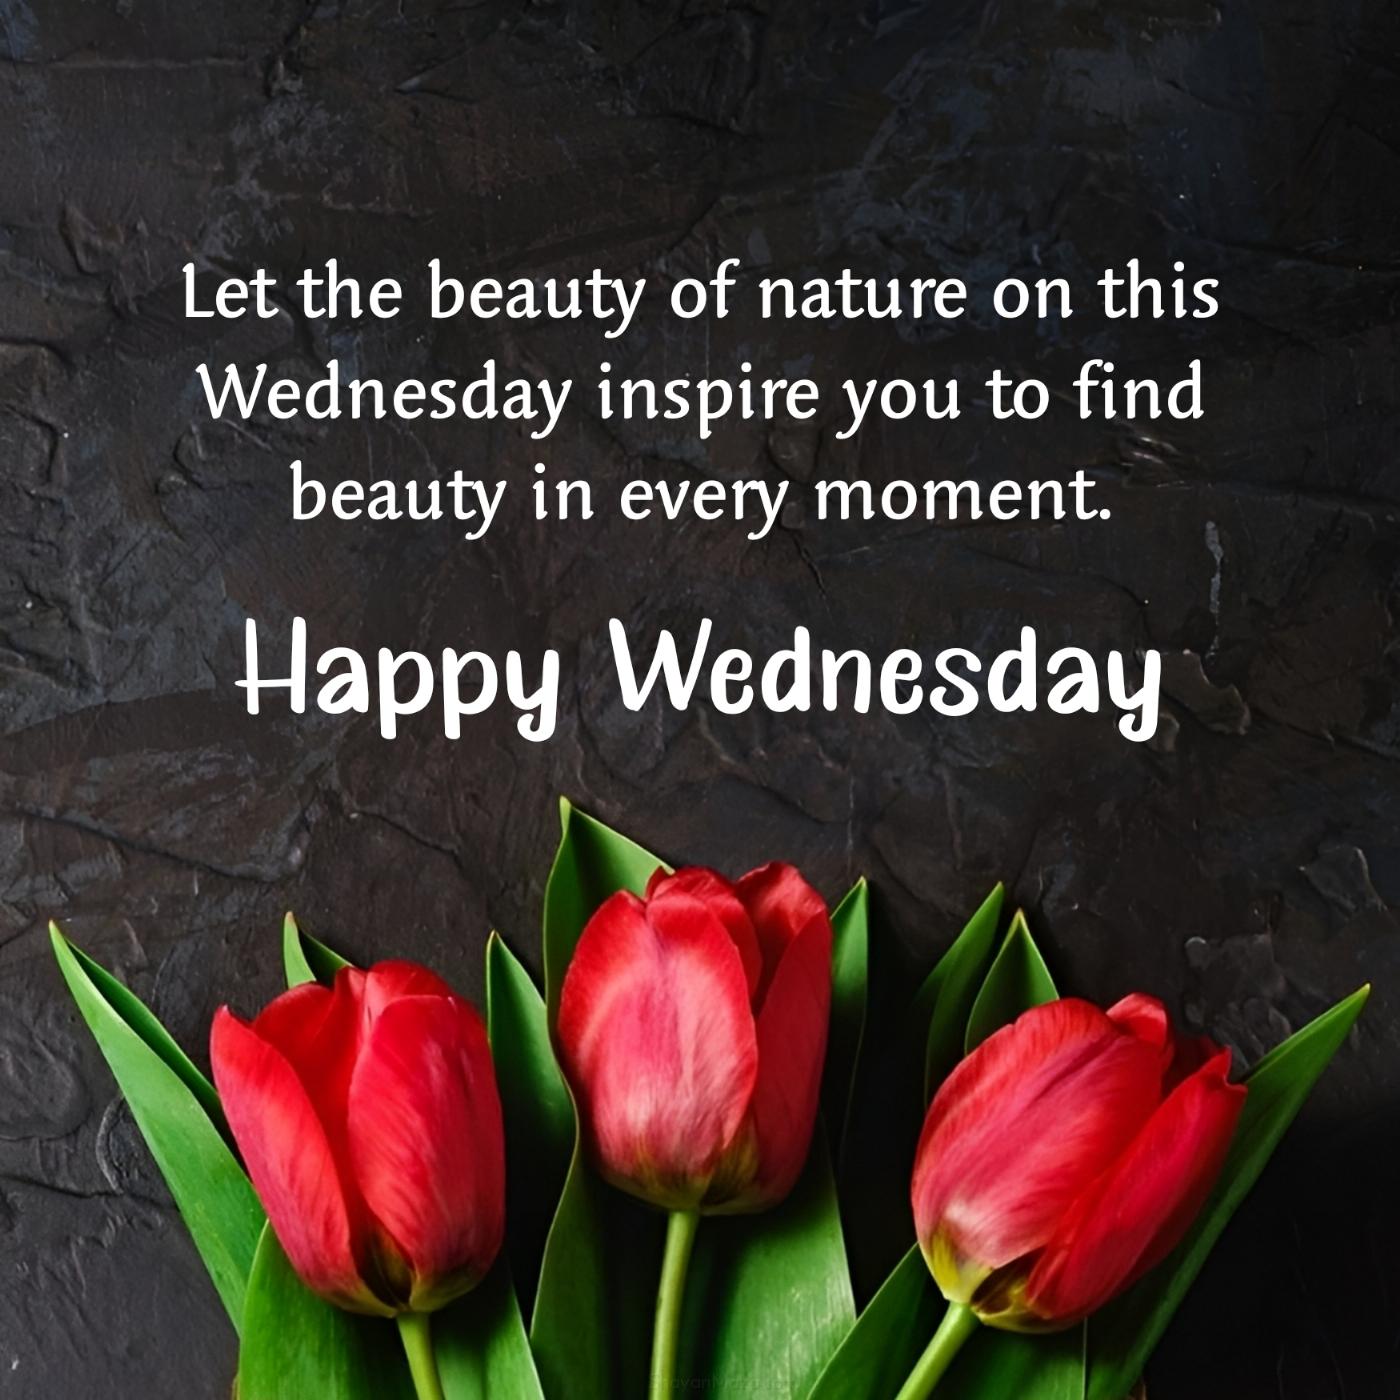 Let the beauty of nature on this Wednesday inspire you to find beauty in every moment